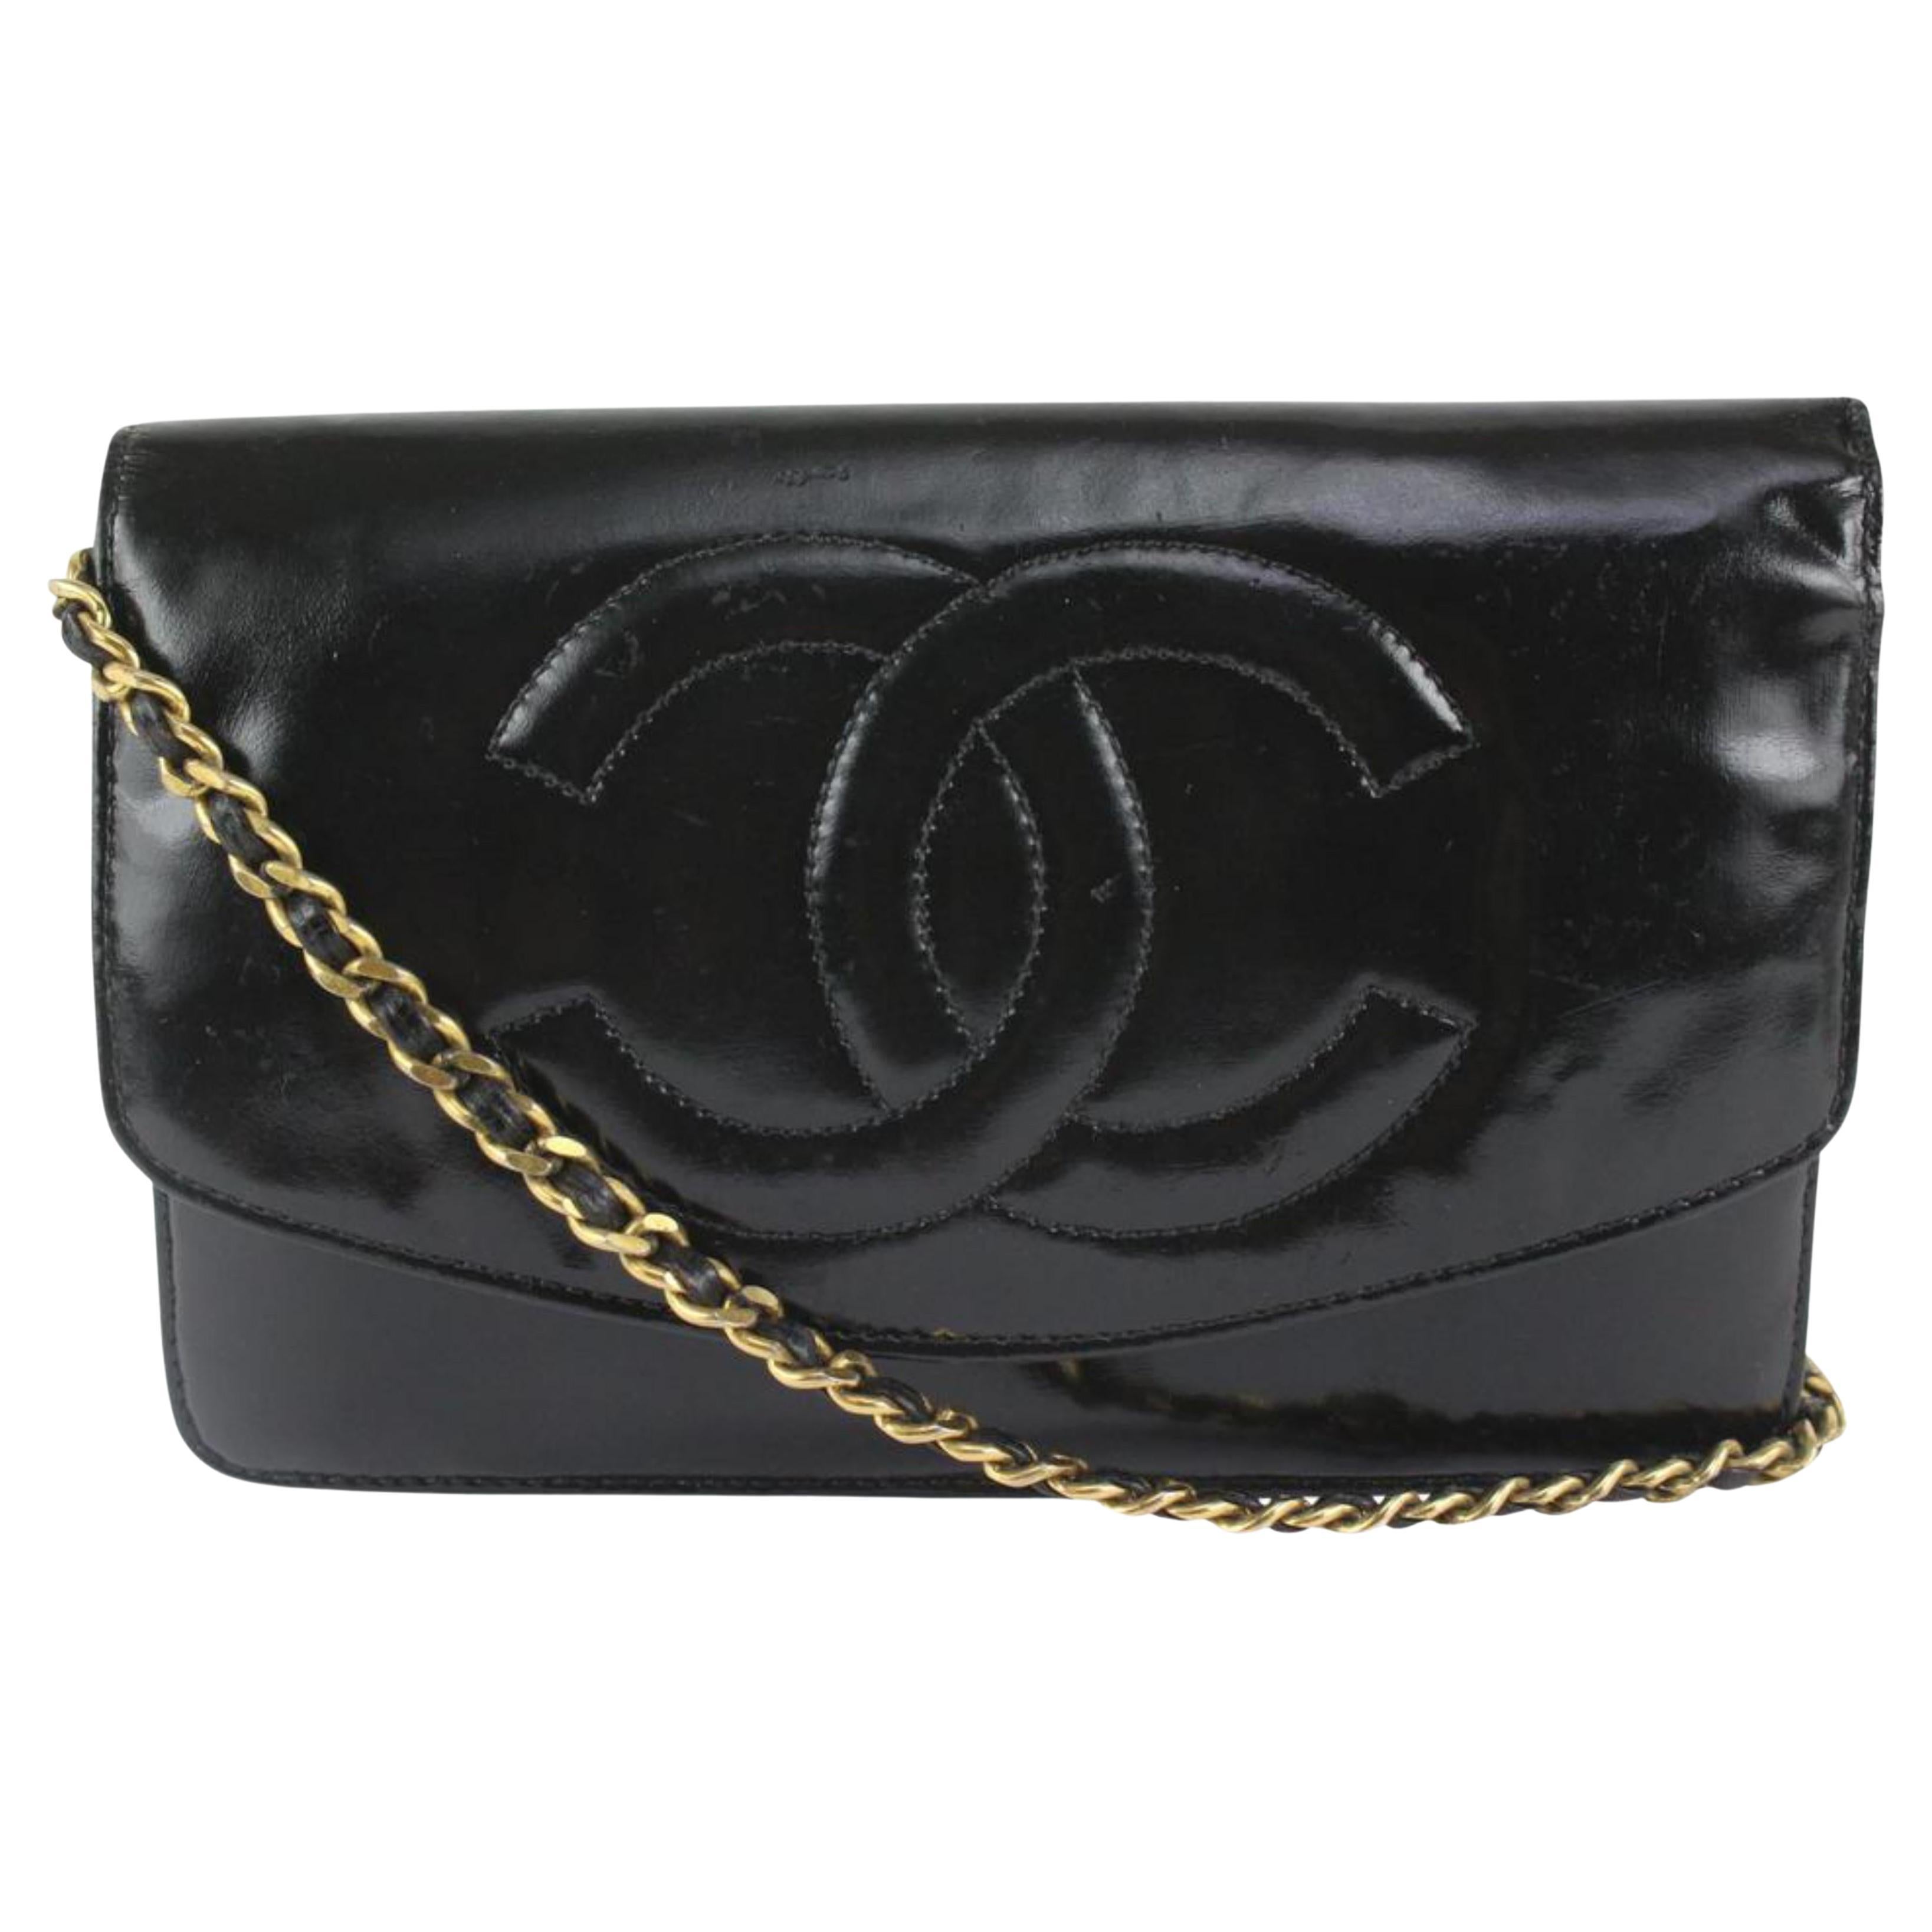 Chanel Vintage Black Patent Leather Timeless Wallet on Chain WOC Flap 1112c59 For Sale